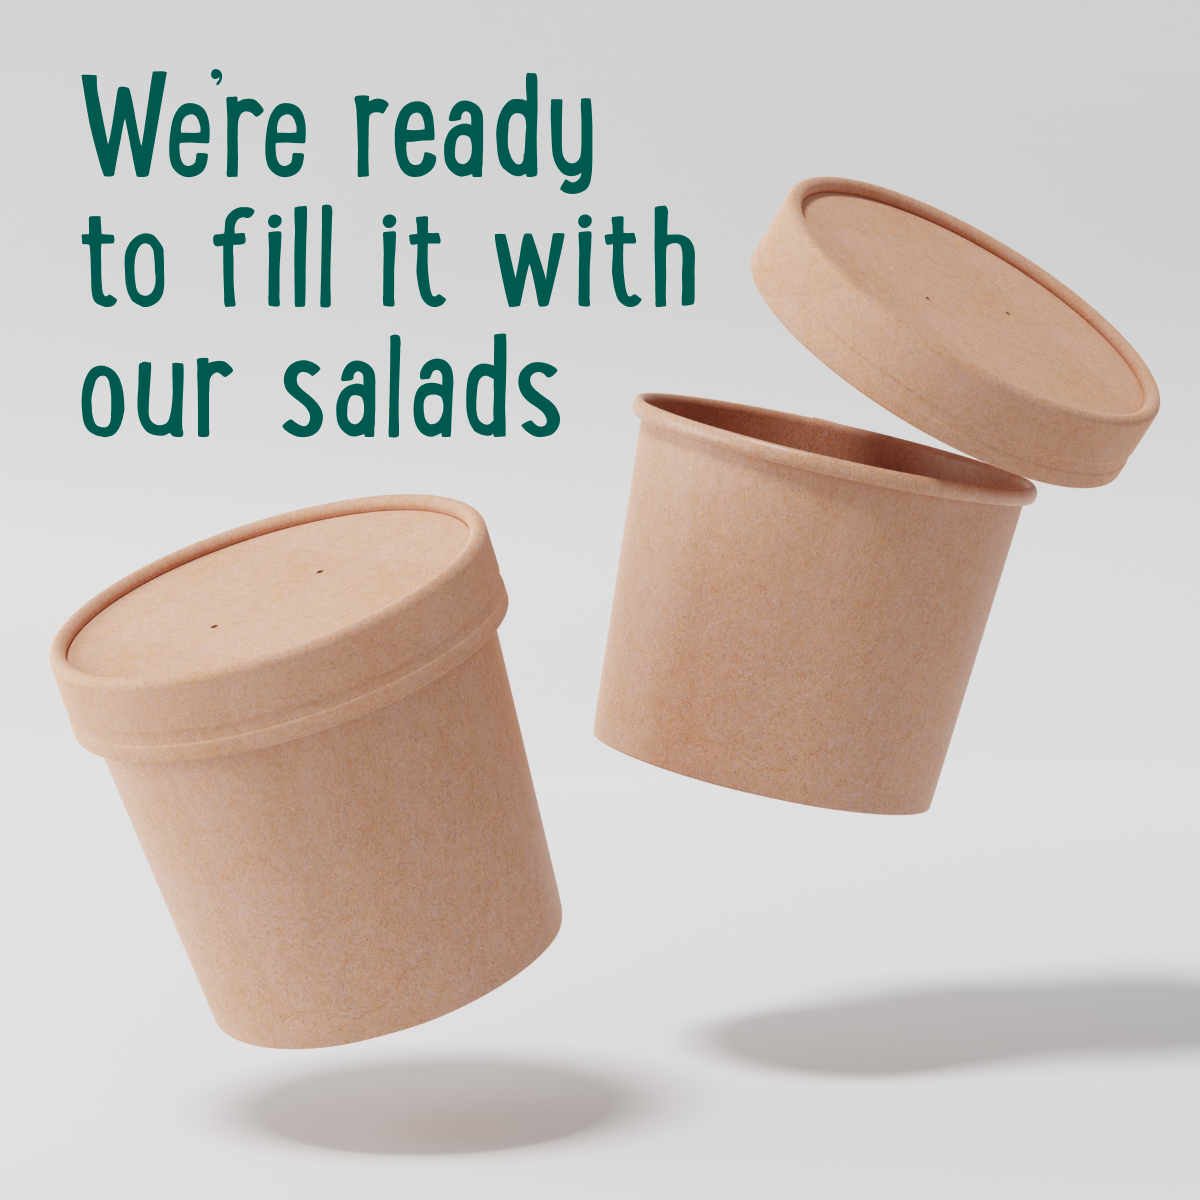 Salad Manufacturers: Revolutionizing The Food Industry With Quality And Innovation